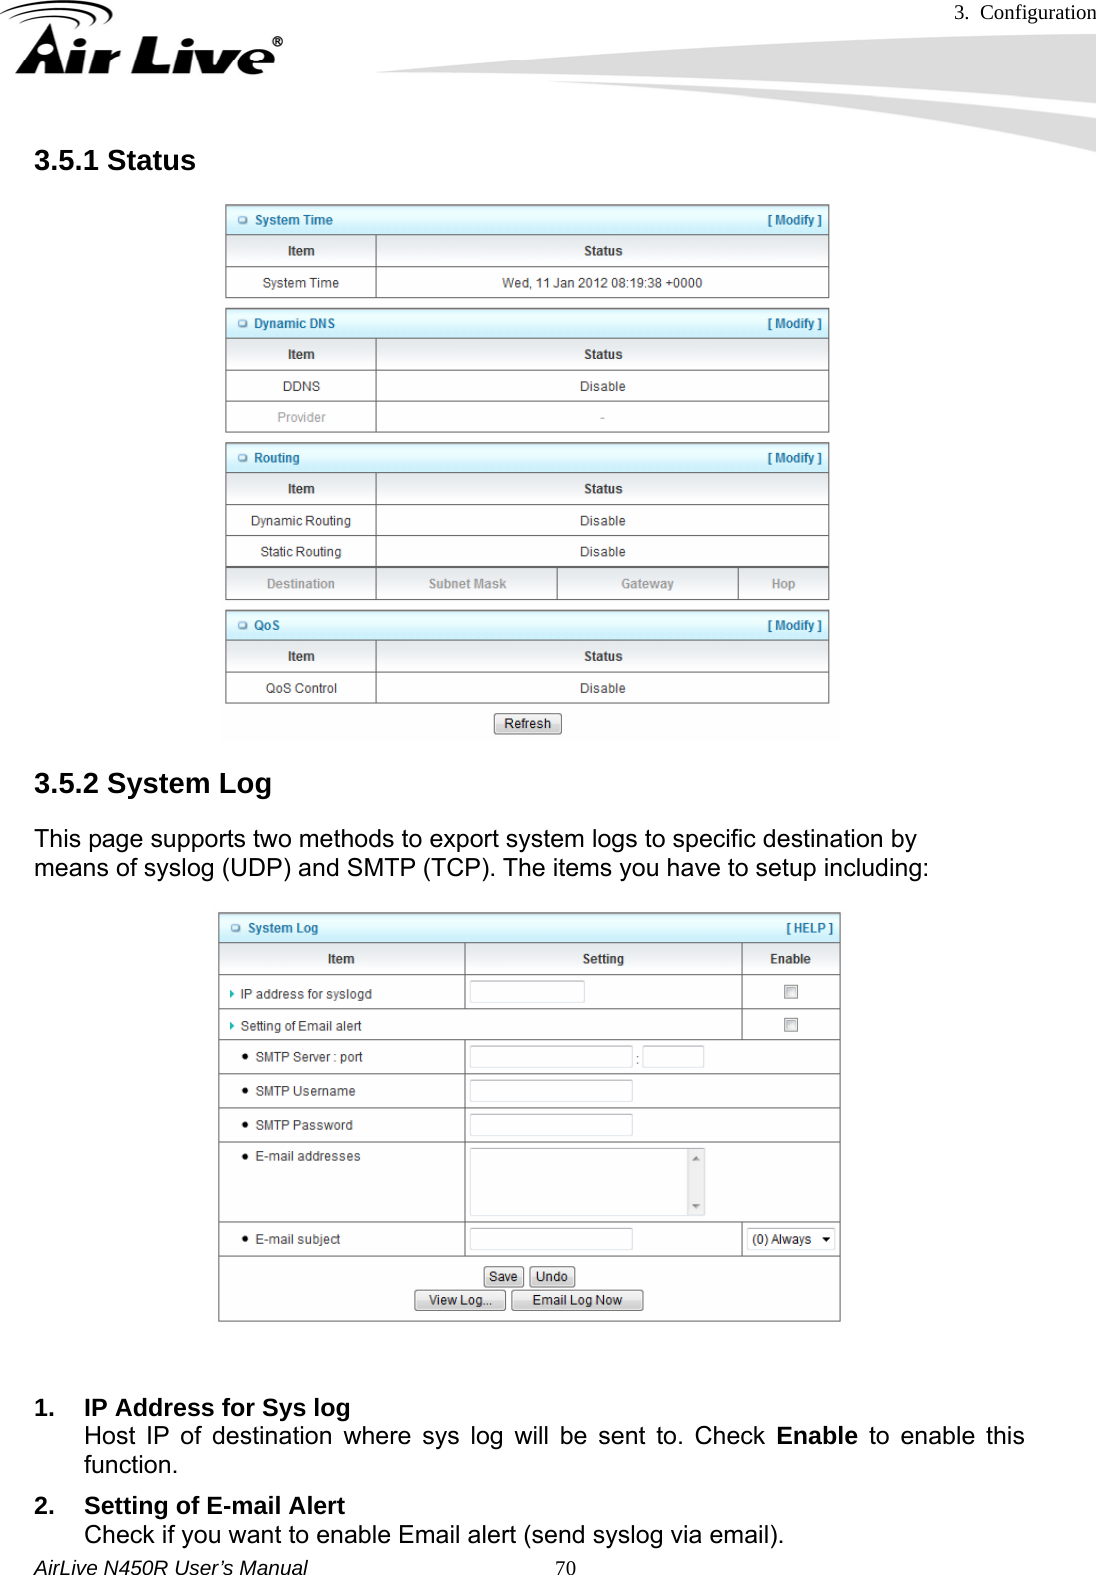 3. Configuration     AirLive N450R User’s Manual   703.5.1 Status 3.5.2 System Log This page supports two methods to export system logs to specific destination by means of syslog (UDP) and SMTP (TCP). The items you have to setup including:   1.  IP Address for Sys log Host IP of destination where sys log will be sent to. Check Enable to enable this function. 2.  Setting of E-mail Alert Check if you want to enable Email alert (send syslog via email). 